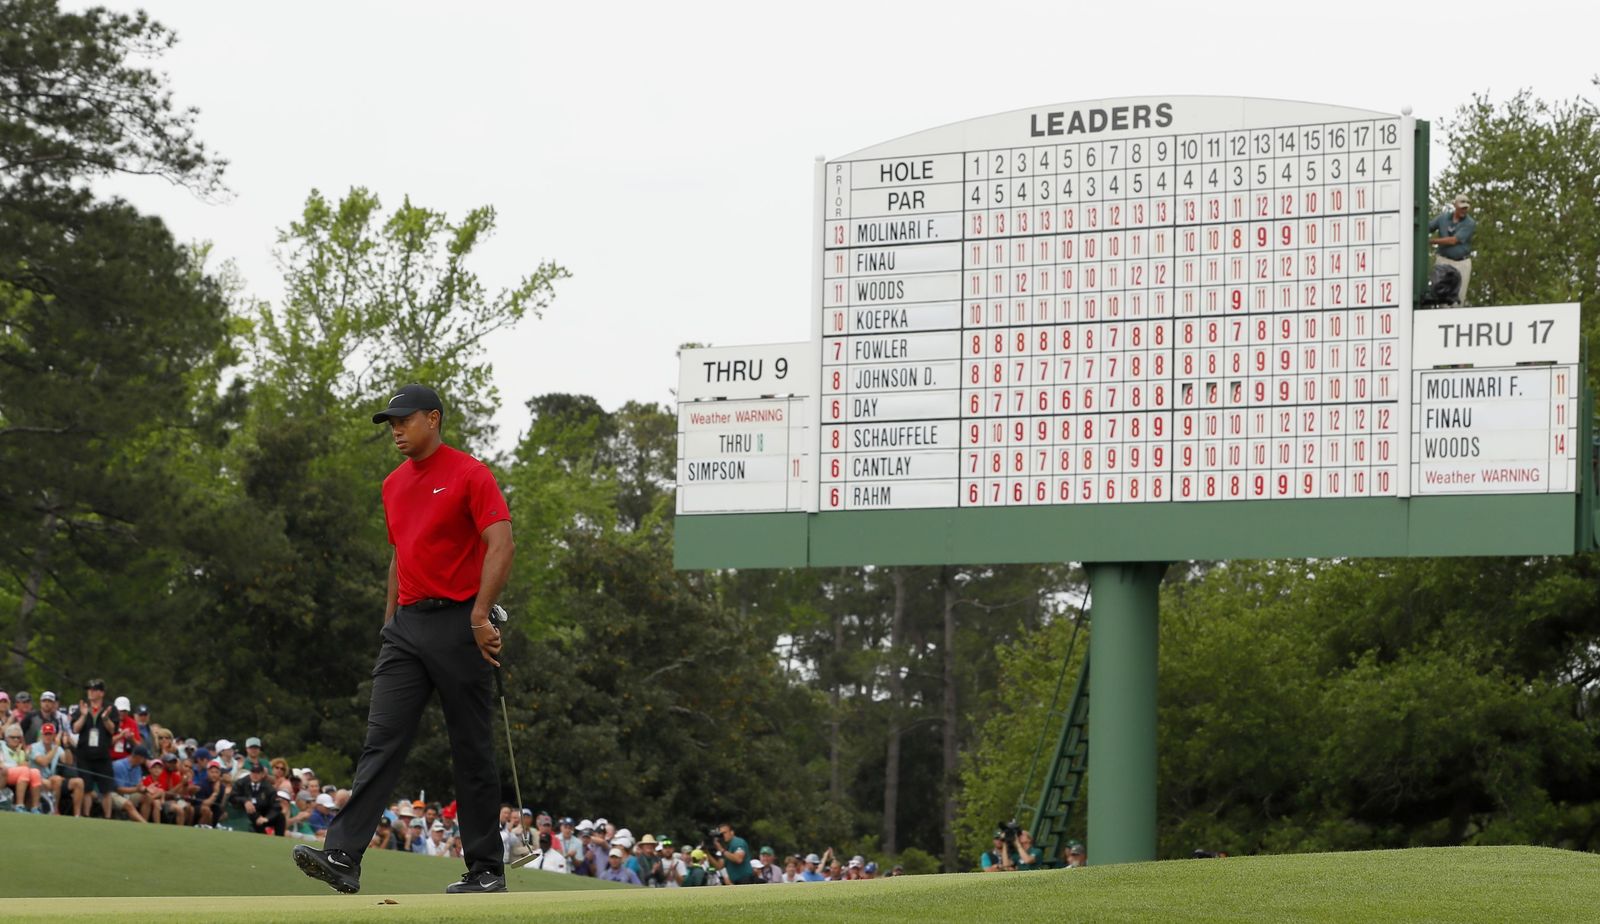 Tiger Woods' Name Spotted On Scoreboard At Augusta National Golf Monthly